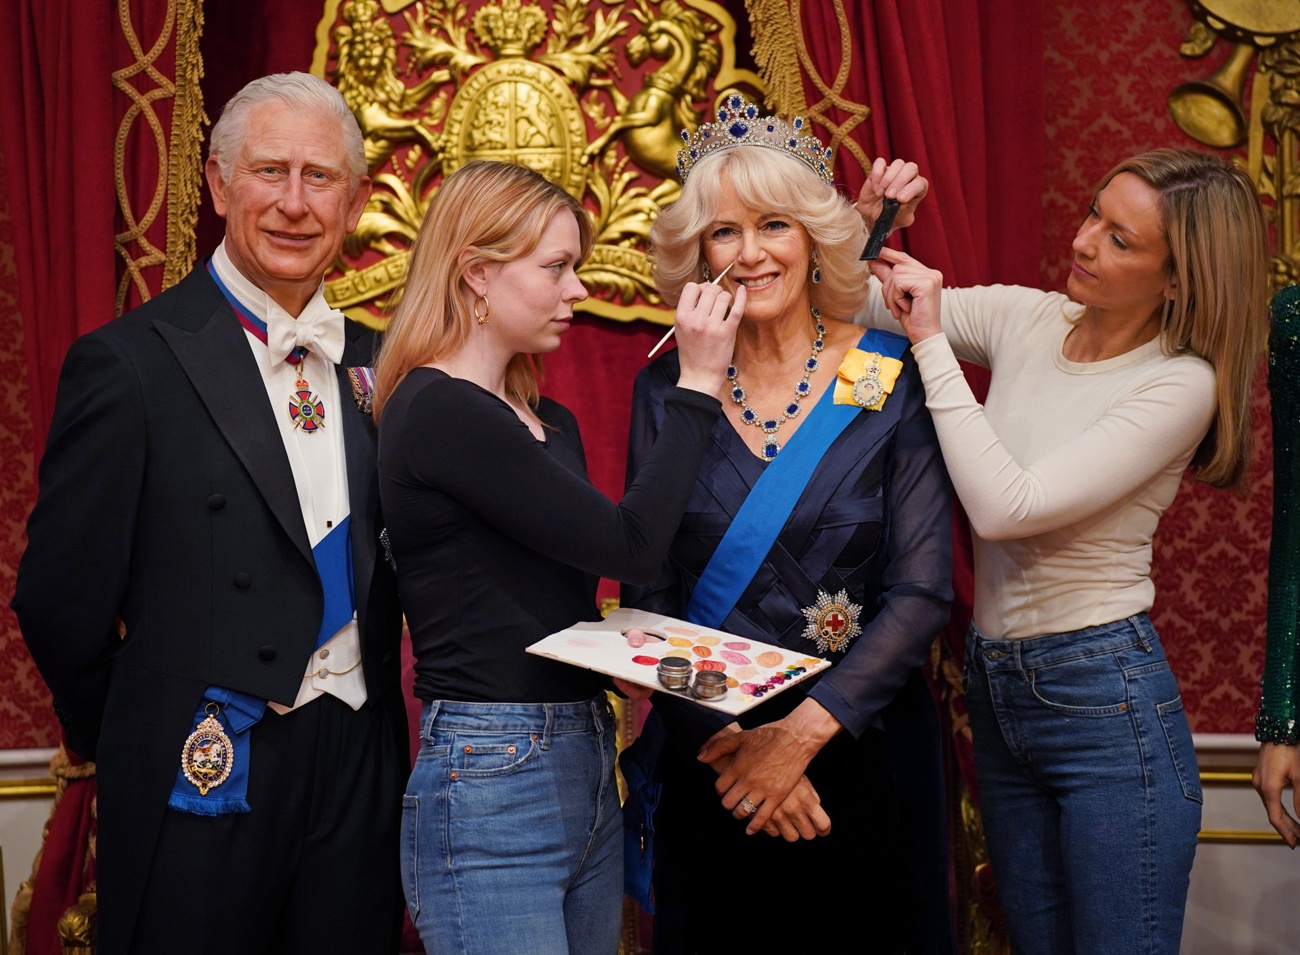 Madame Tussauds Museum in London unveils new wax figure of Camilla